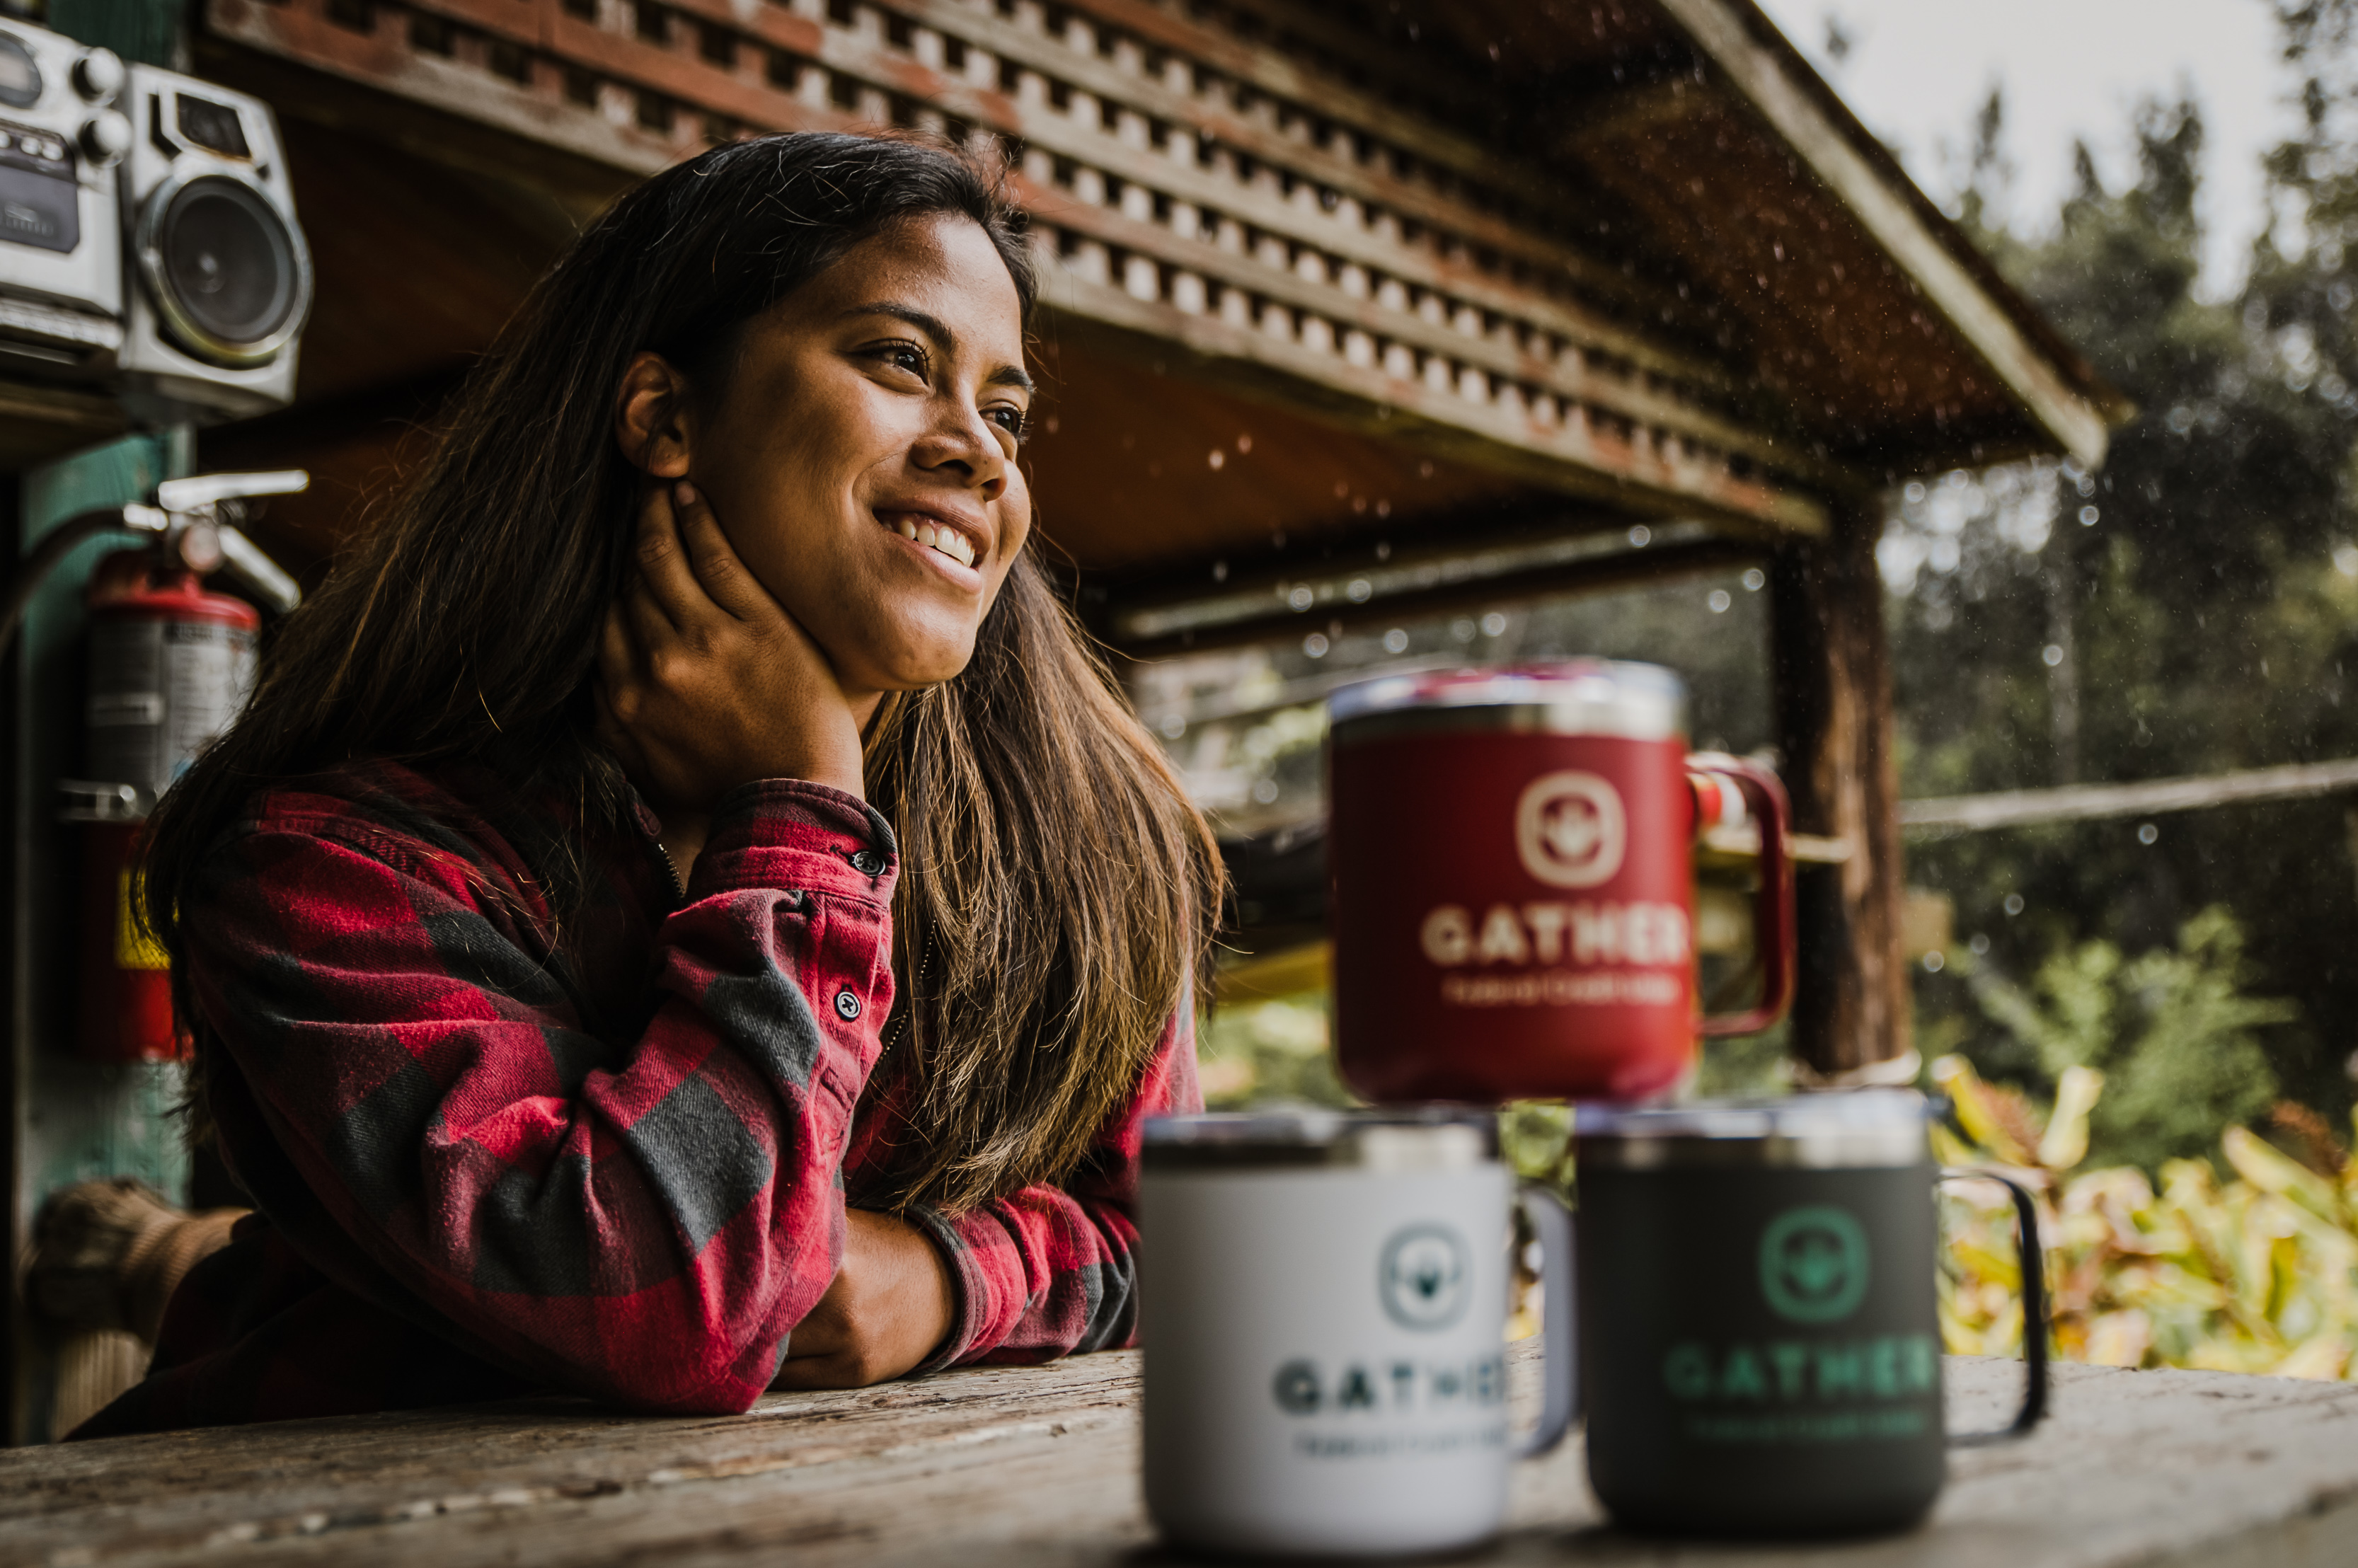 woman smiling in a red and black plaid shirt with Gather Federal Credit Union drinking mugs.